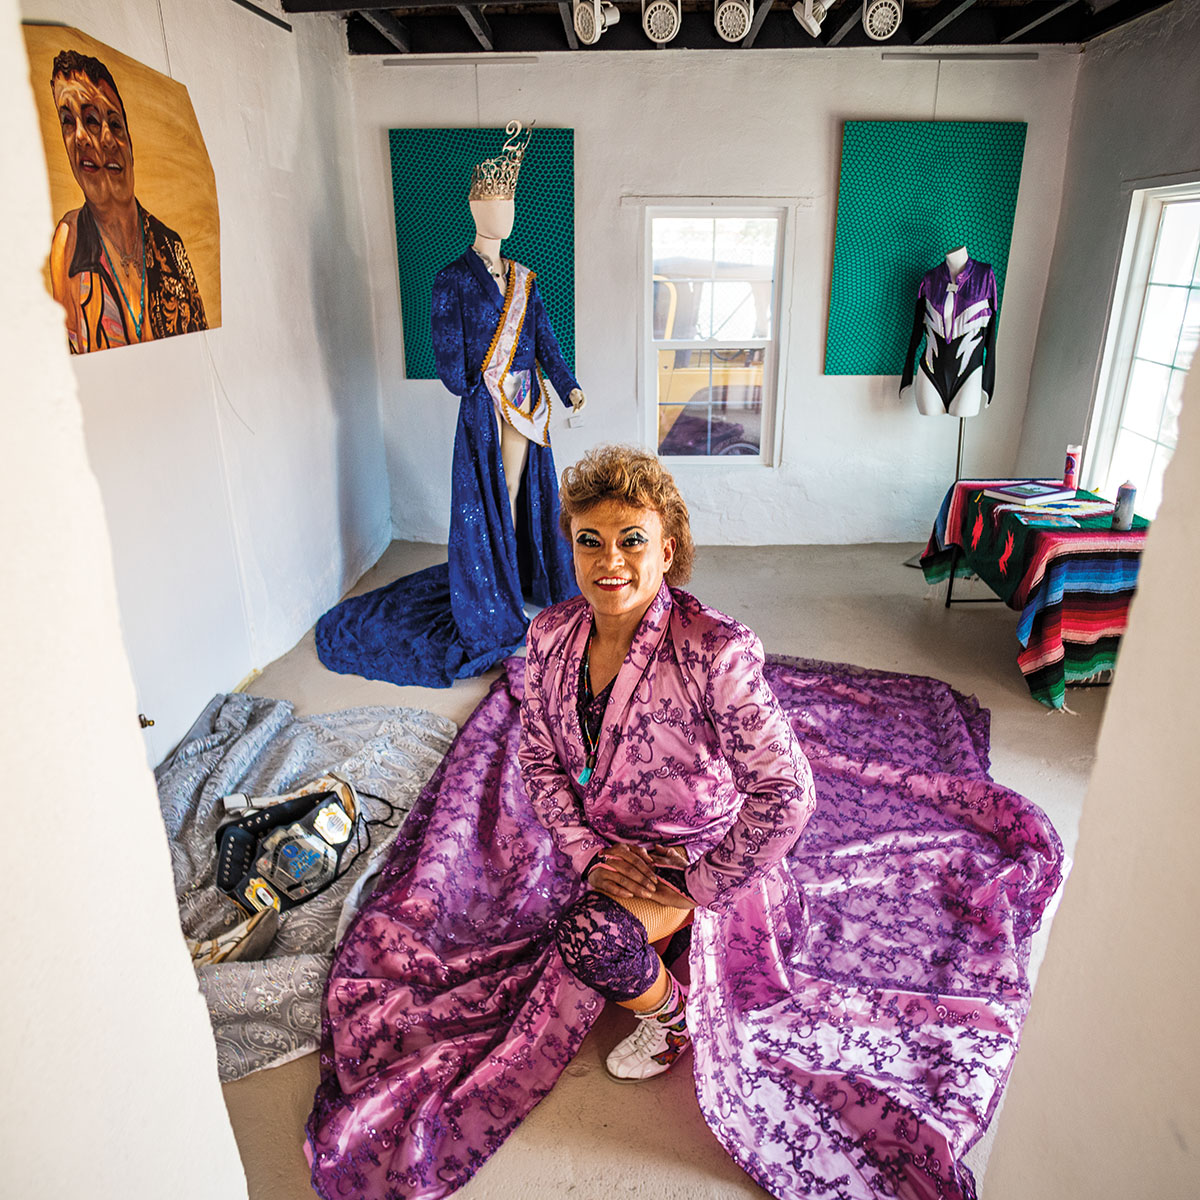 A person in a large, flowing purple gown sits on the floor in a white room with large paintings on the wall